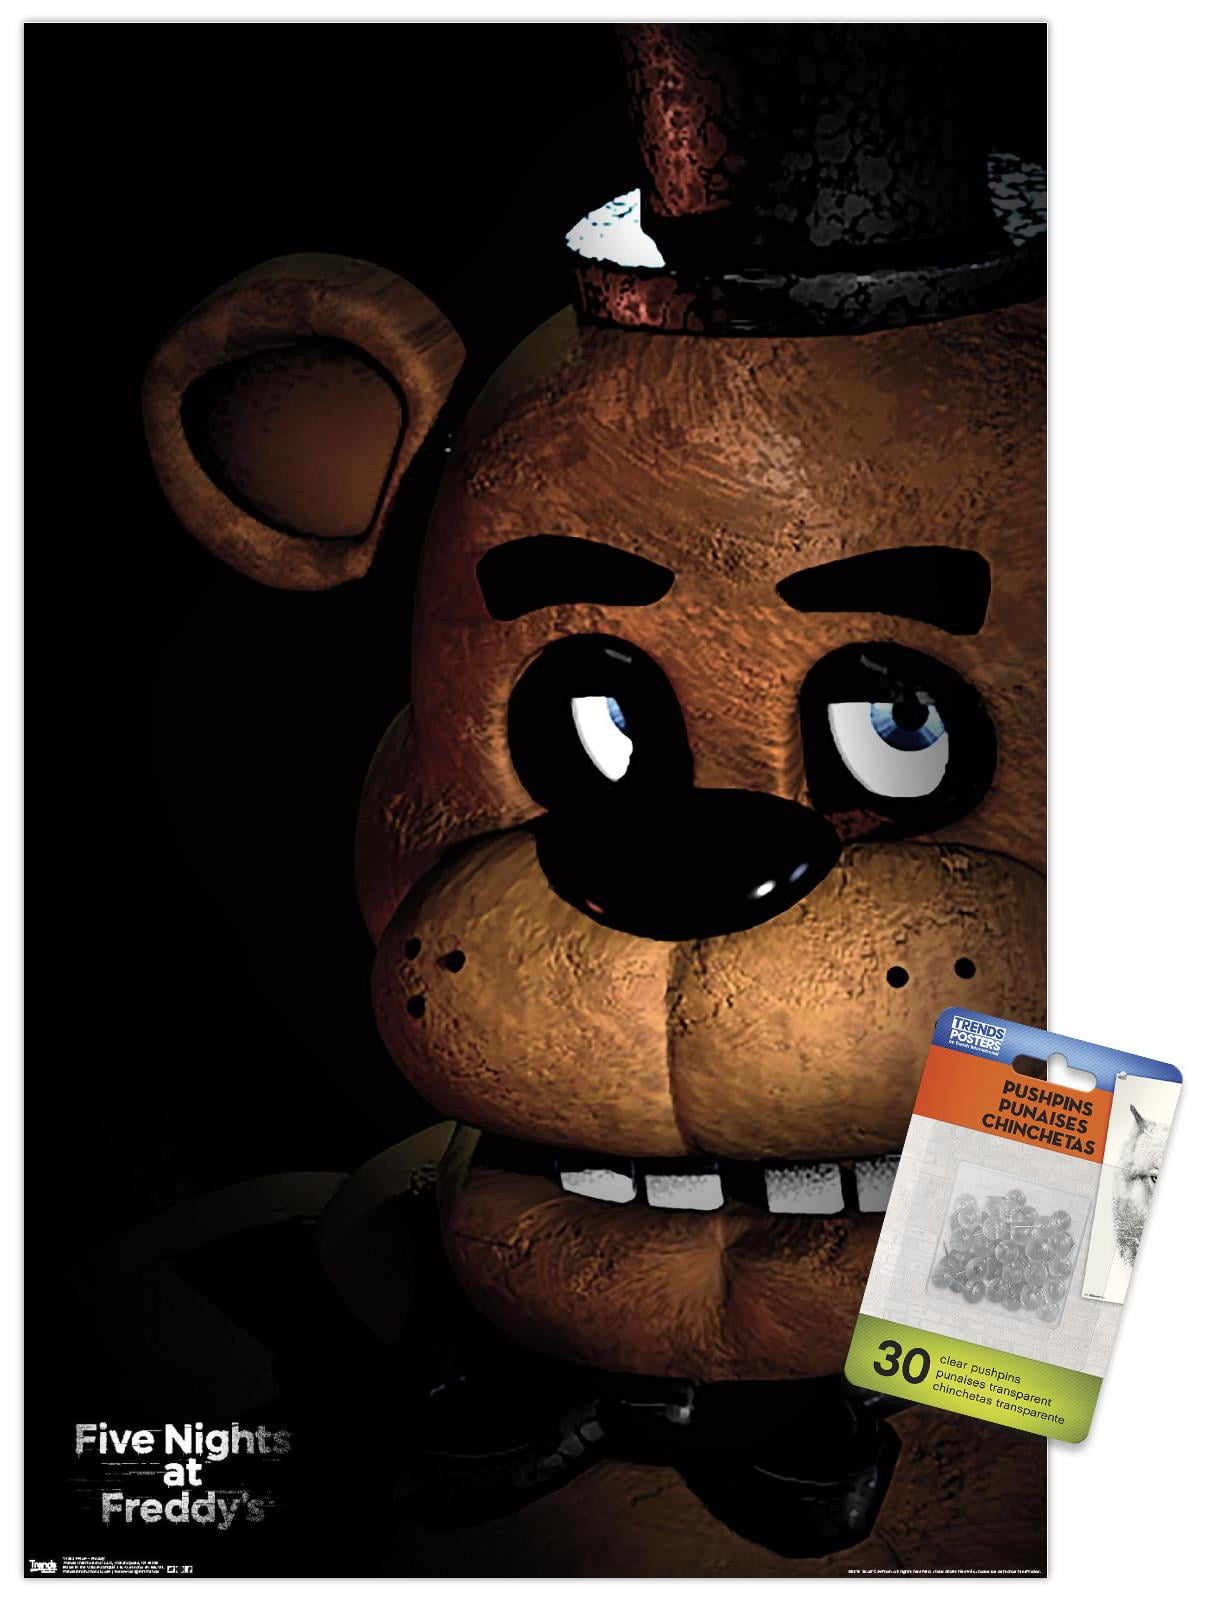 Five Nights at Freddy's Movie - Foxy One Sheet Wall Poster with Push Pins,  14.725 x 22.375 